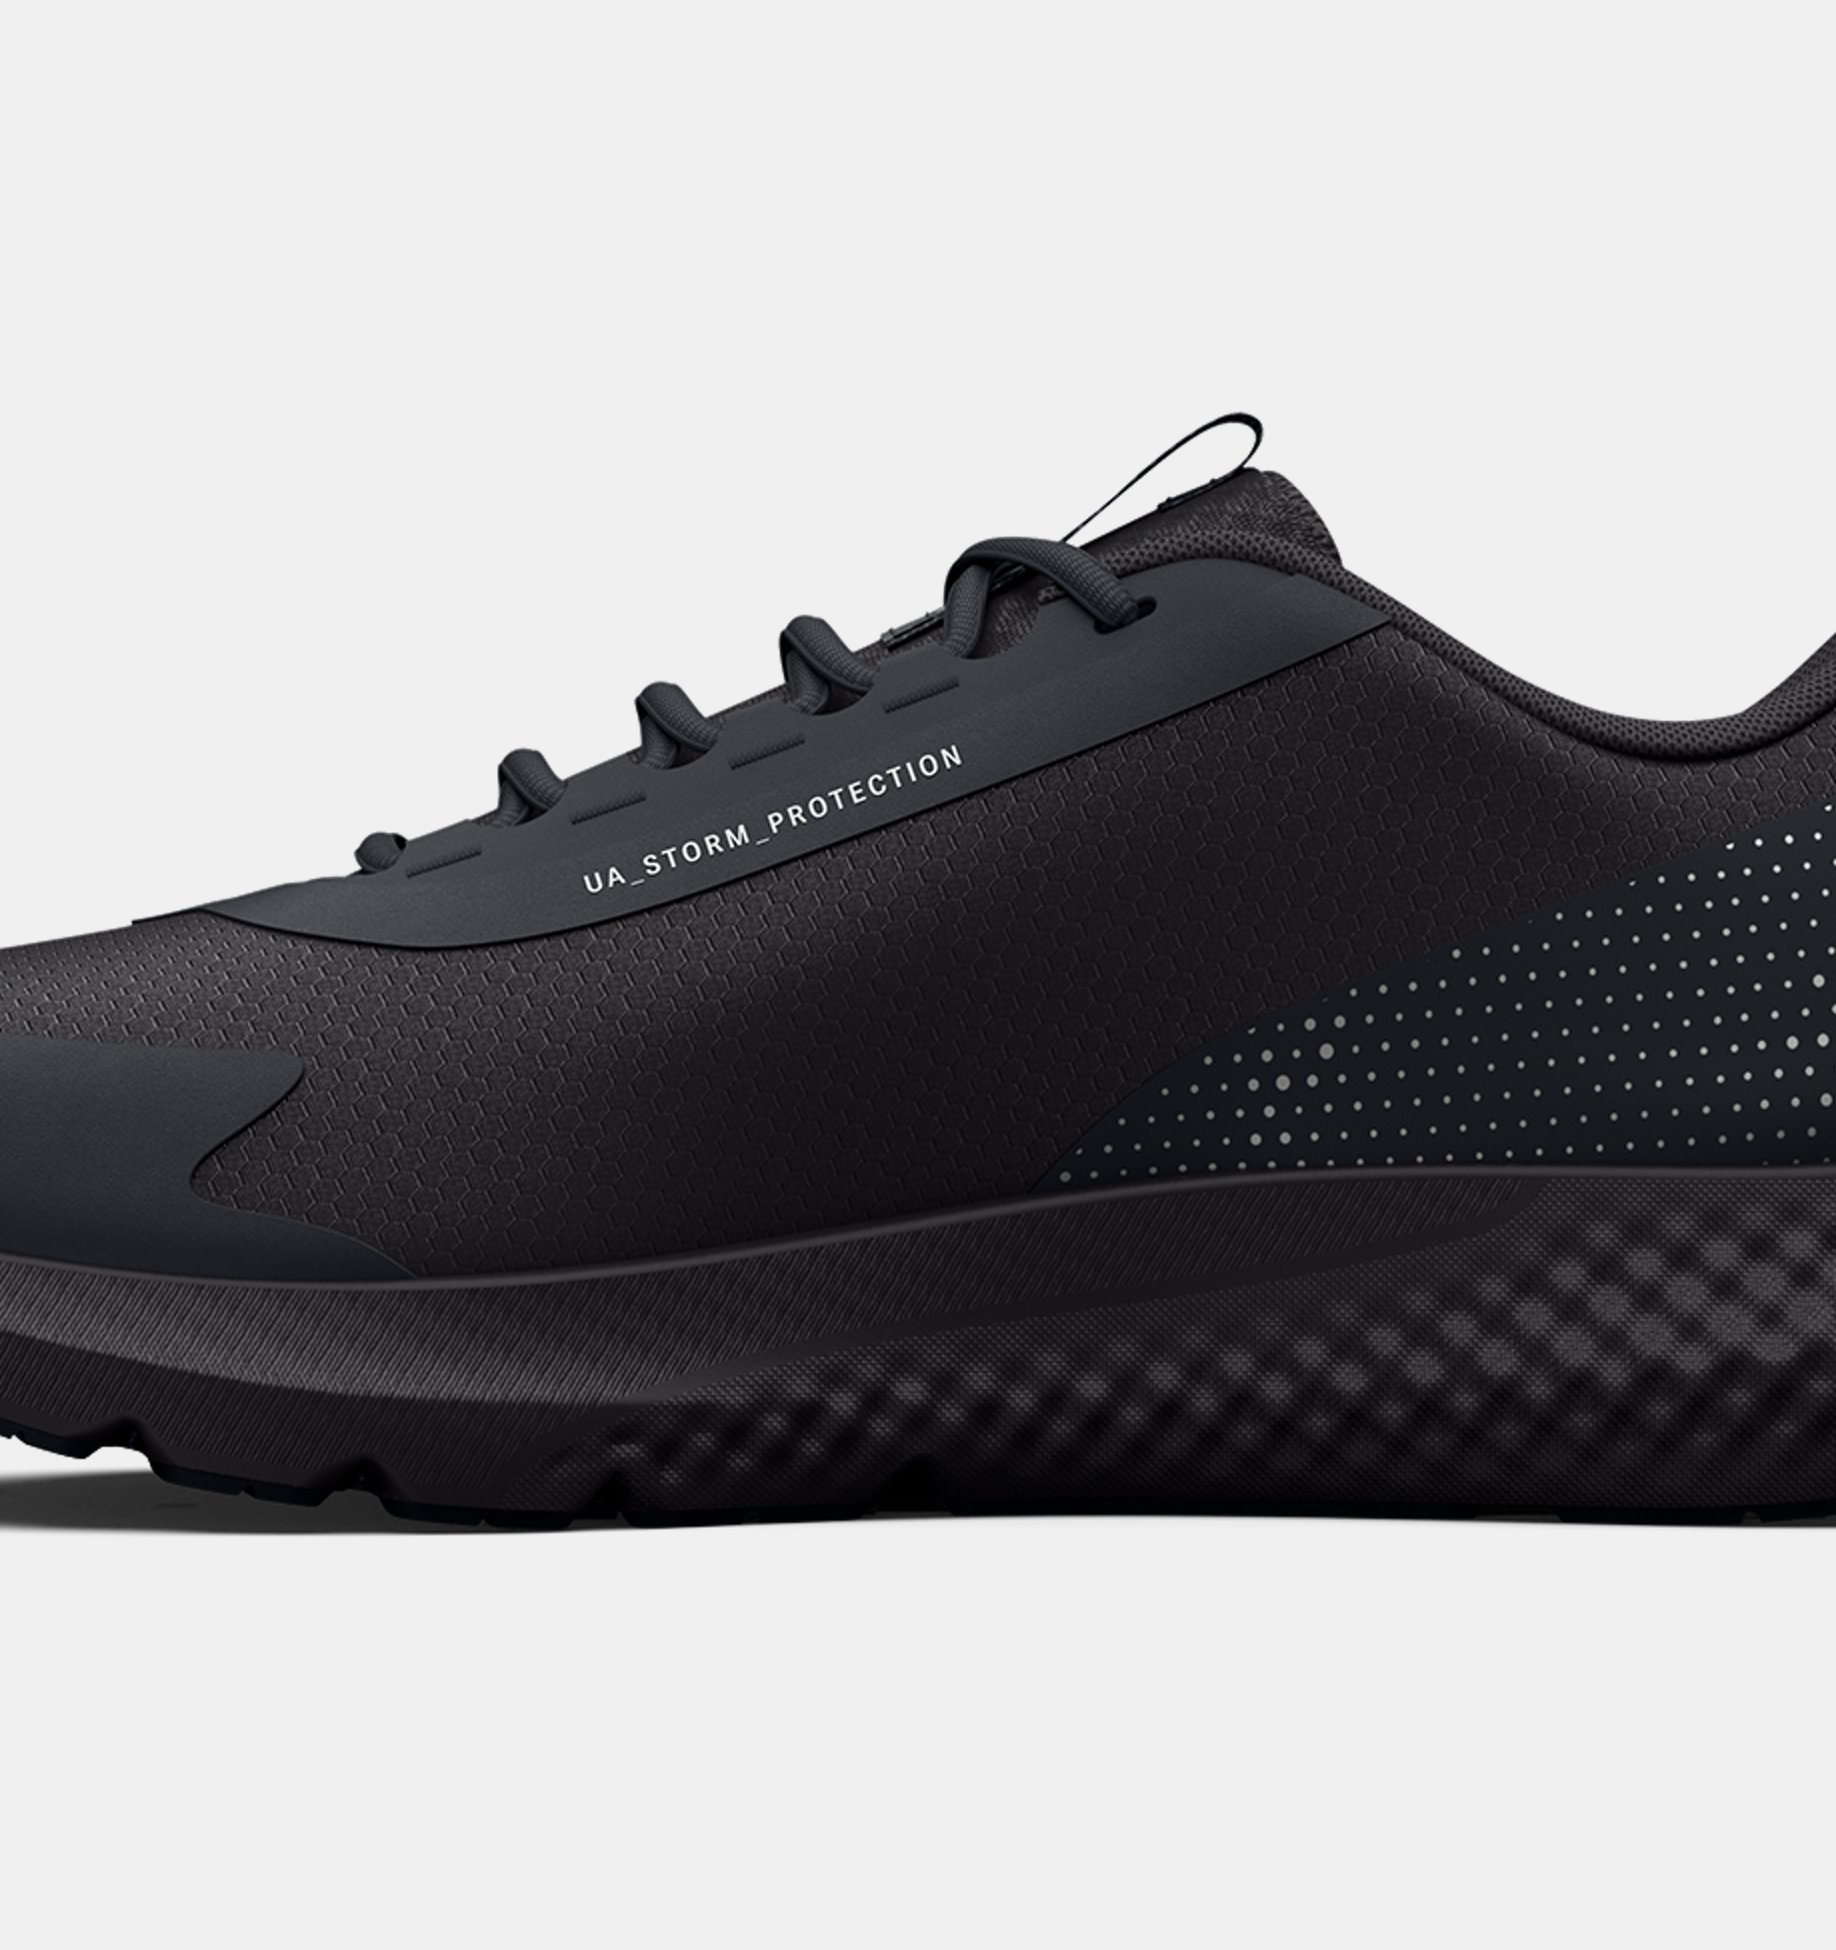 Under Armour Charged Rogue 3 Storm trainers in black